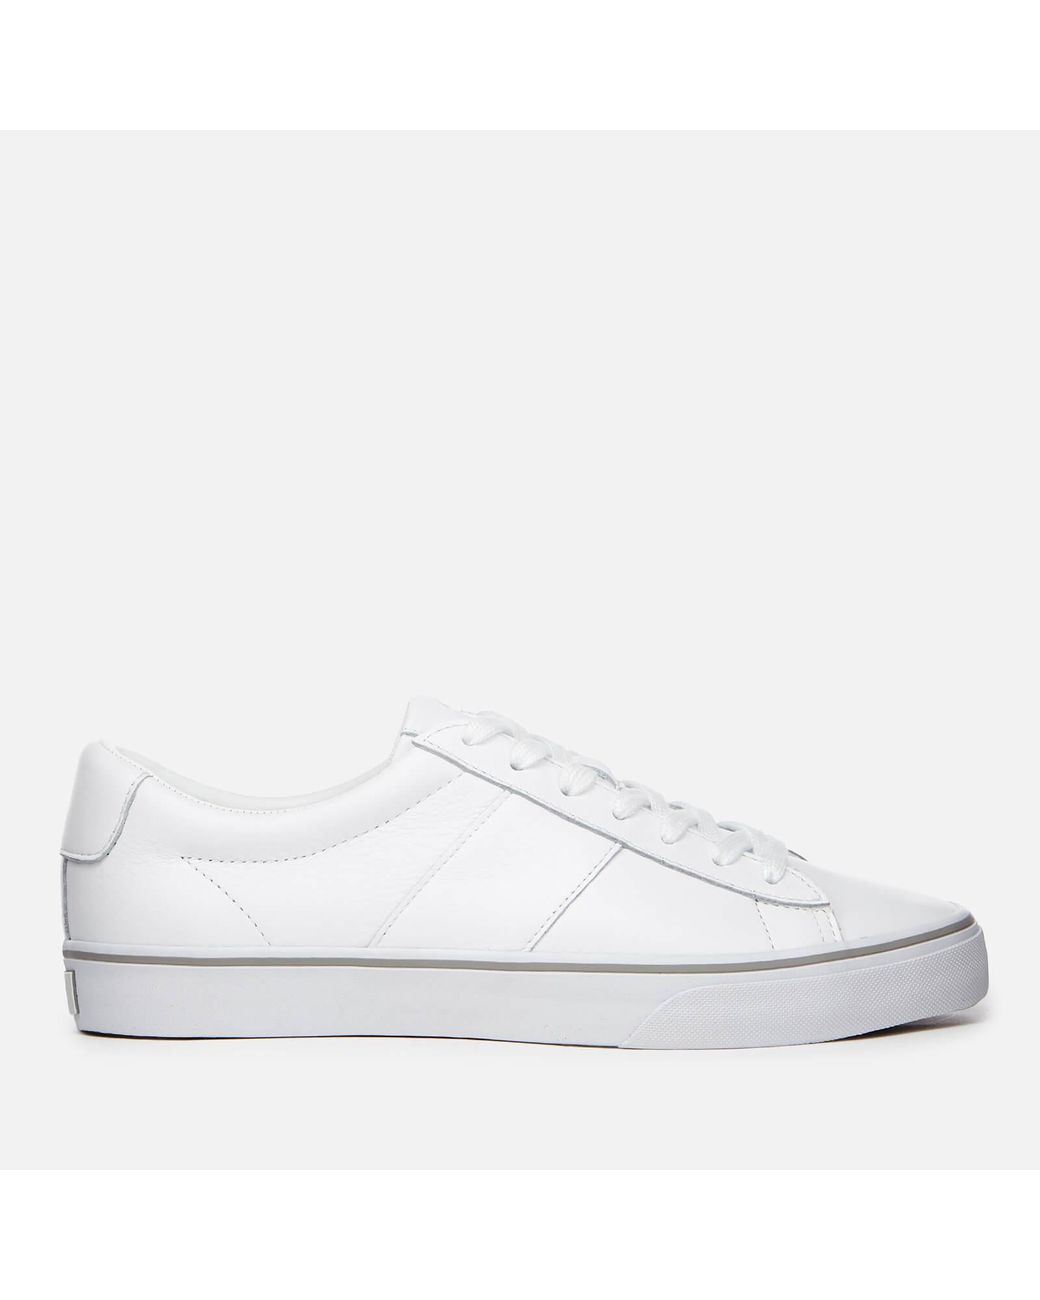 Polo Ralph Lauren Sayer Leather Trainers in White for Men | Lyst UK